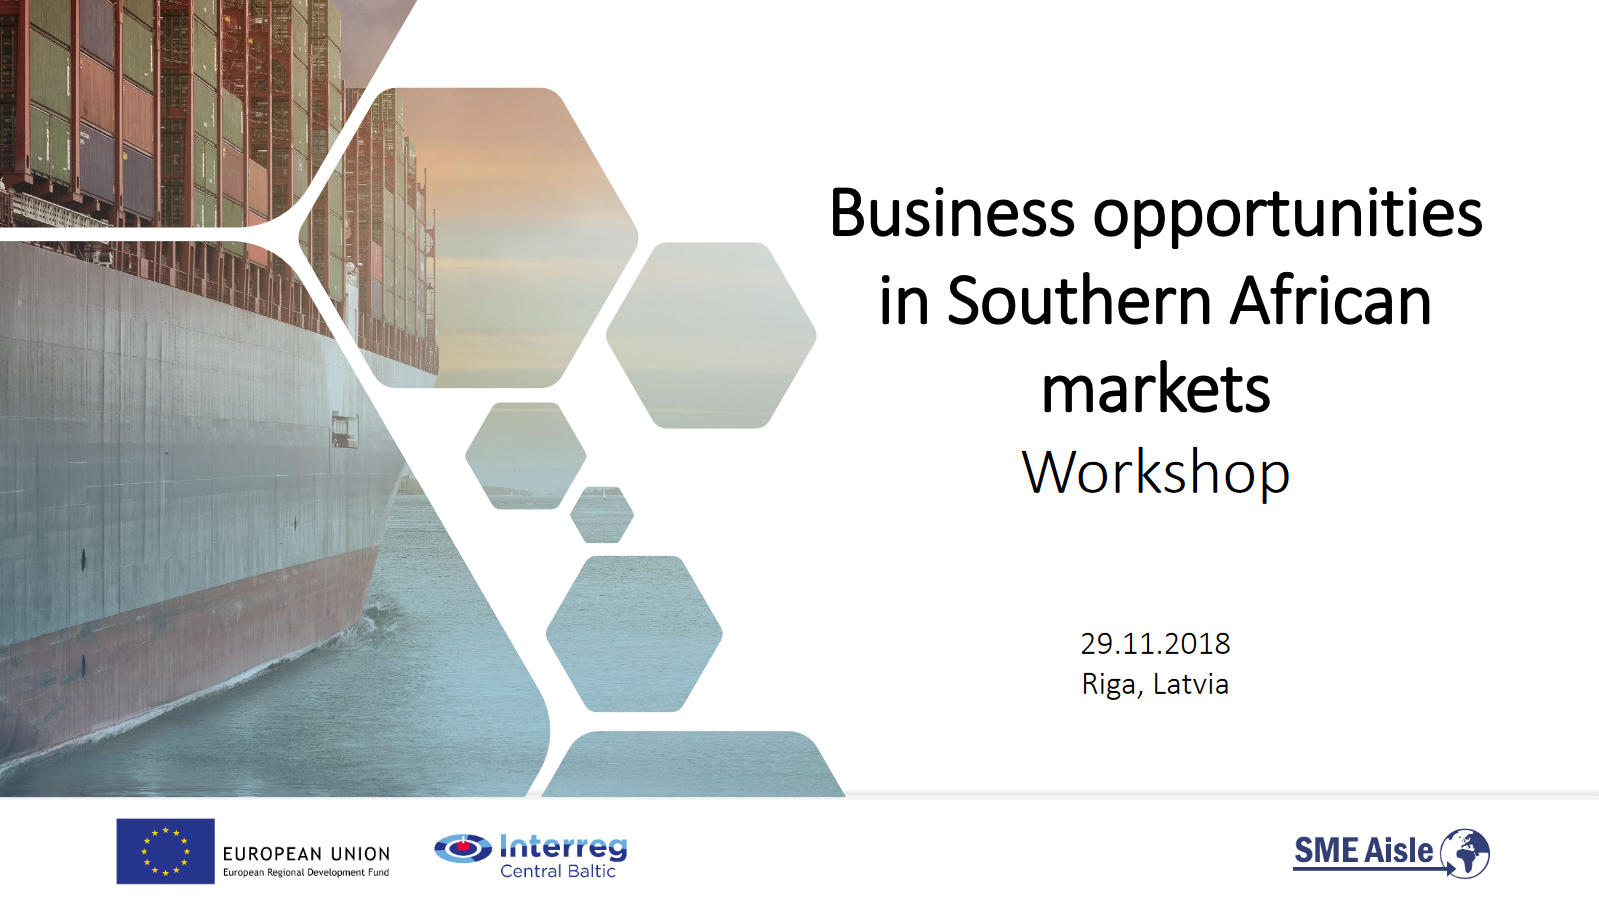 Click to open Business opportunities in Southern African markets presentation.